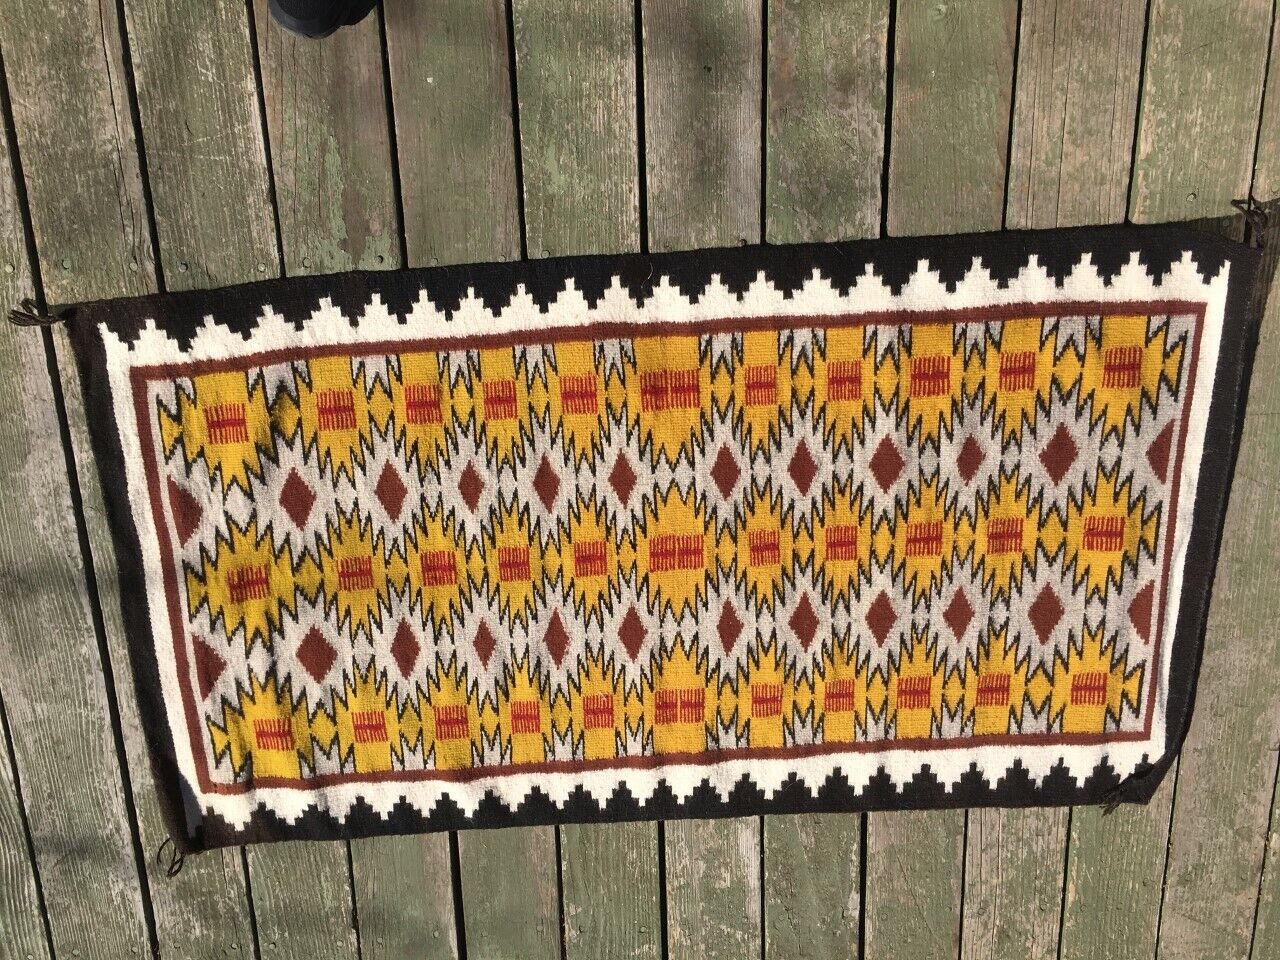 Mid 20th Century Navajo Native American Rug 56 x 30 inches Hand Woven Hand Spun